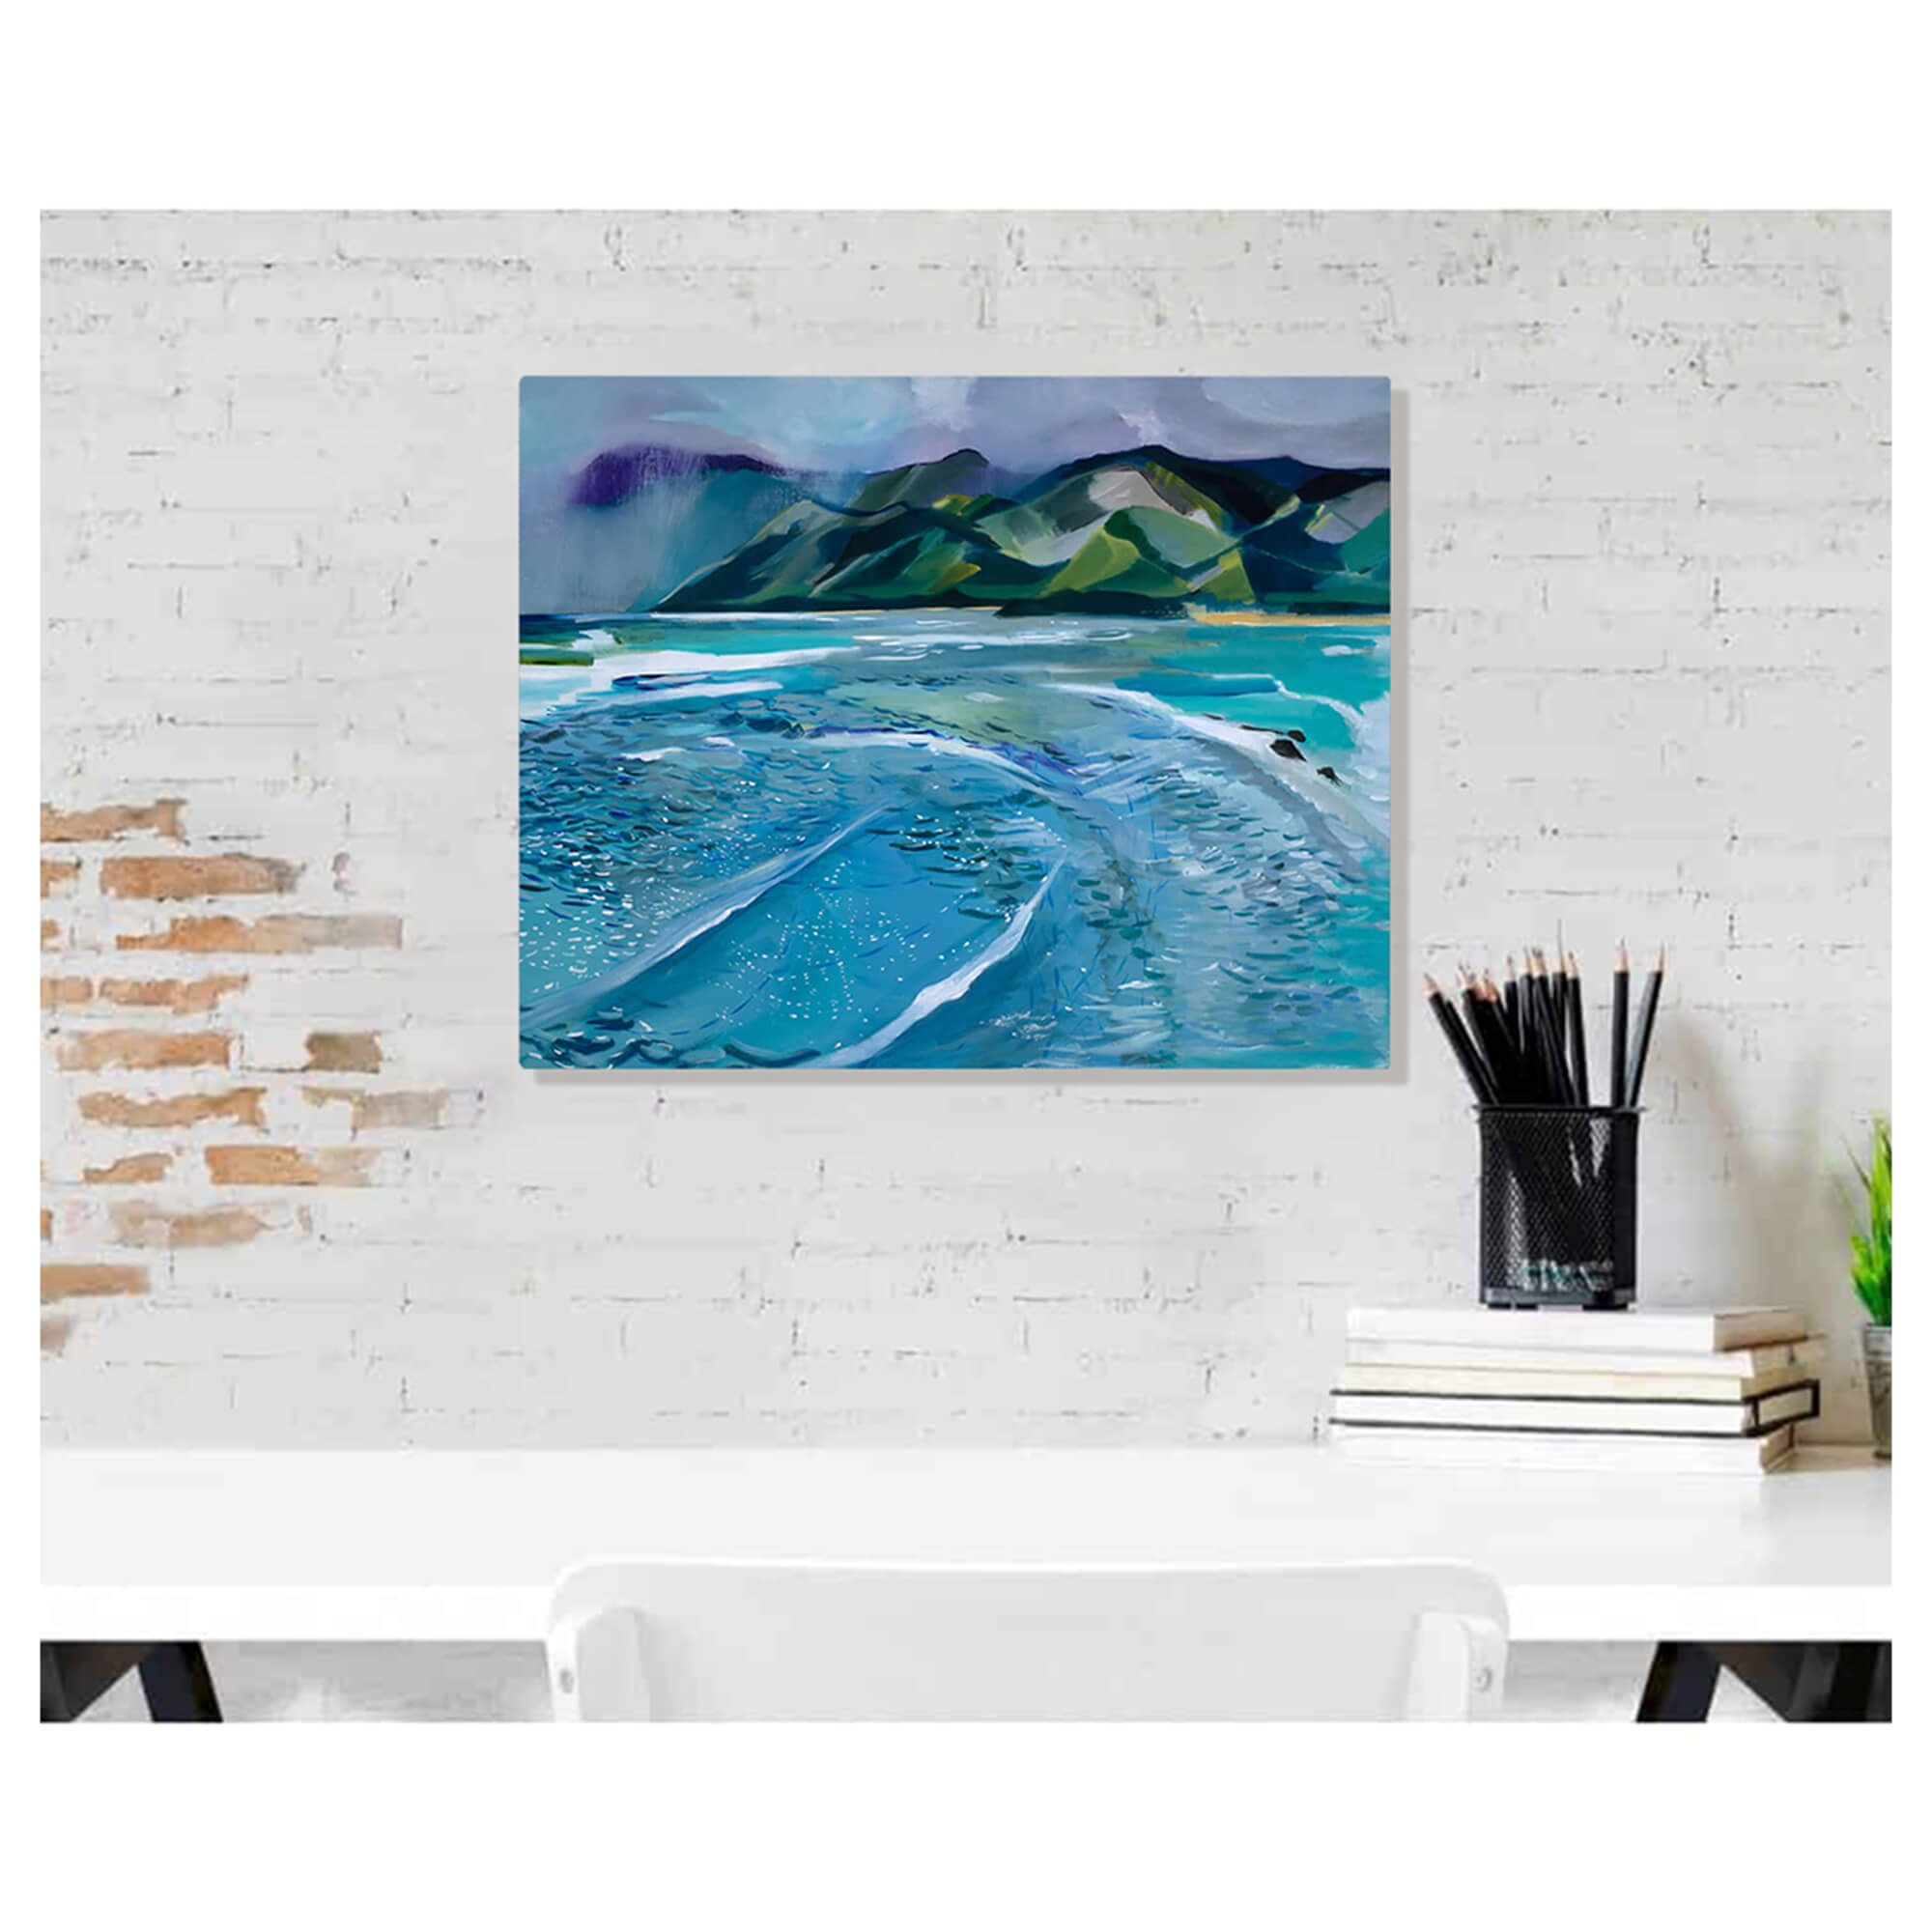 A metal art print of an abstract teal-tinted waves crashing towards the shore and some mountain background by Hawaii artist Saumolia Puapuaga